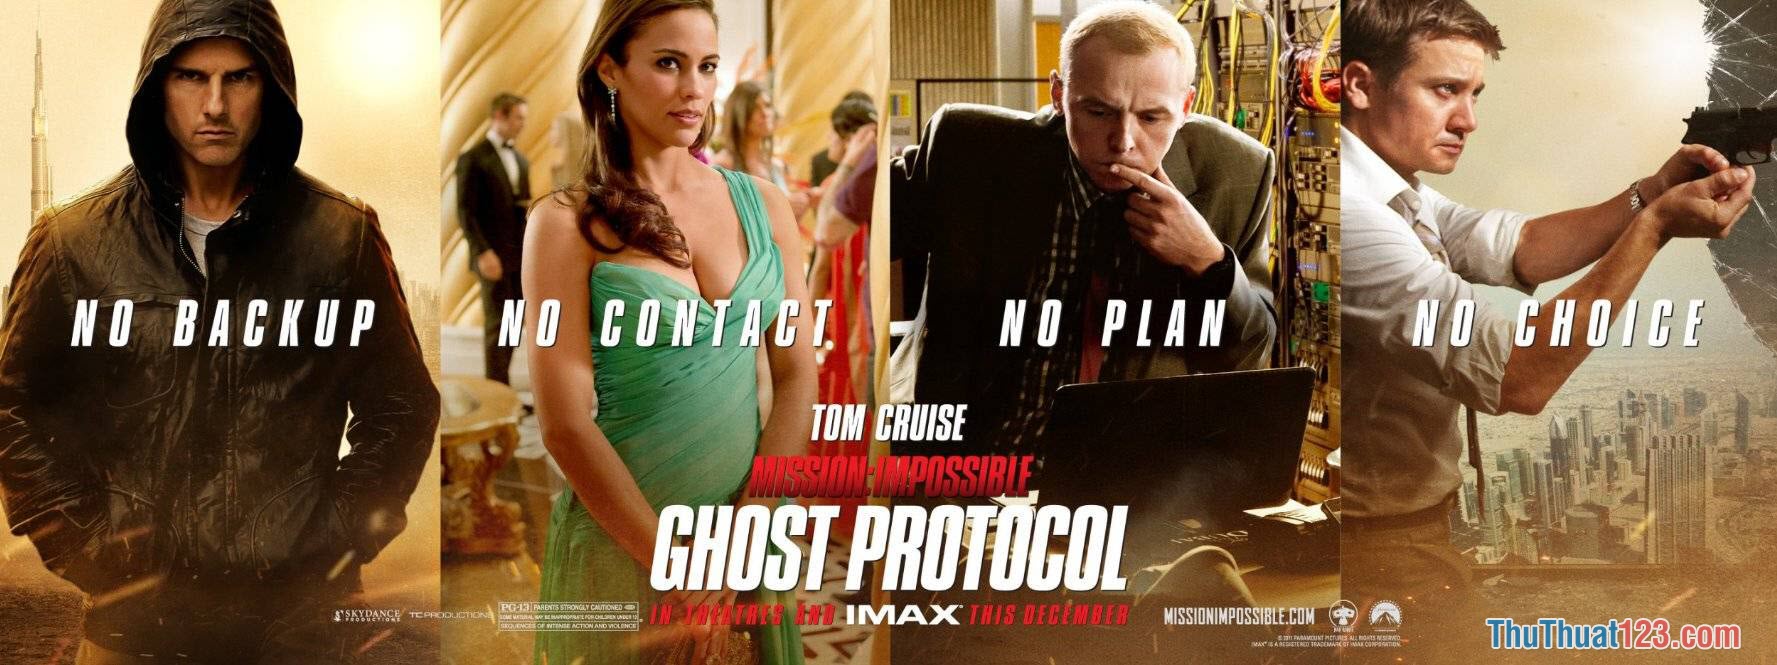 Mission Impossible 4 - Ghost Protocol (2013)